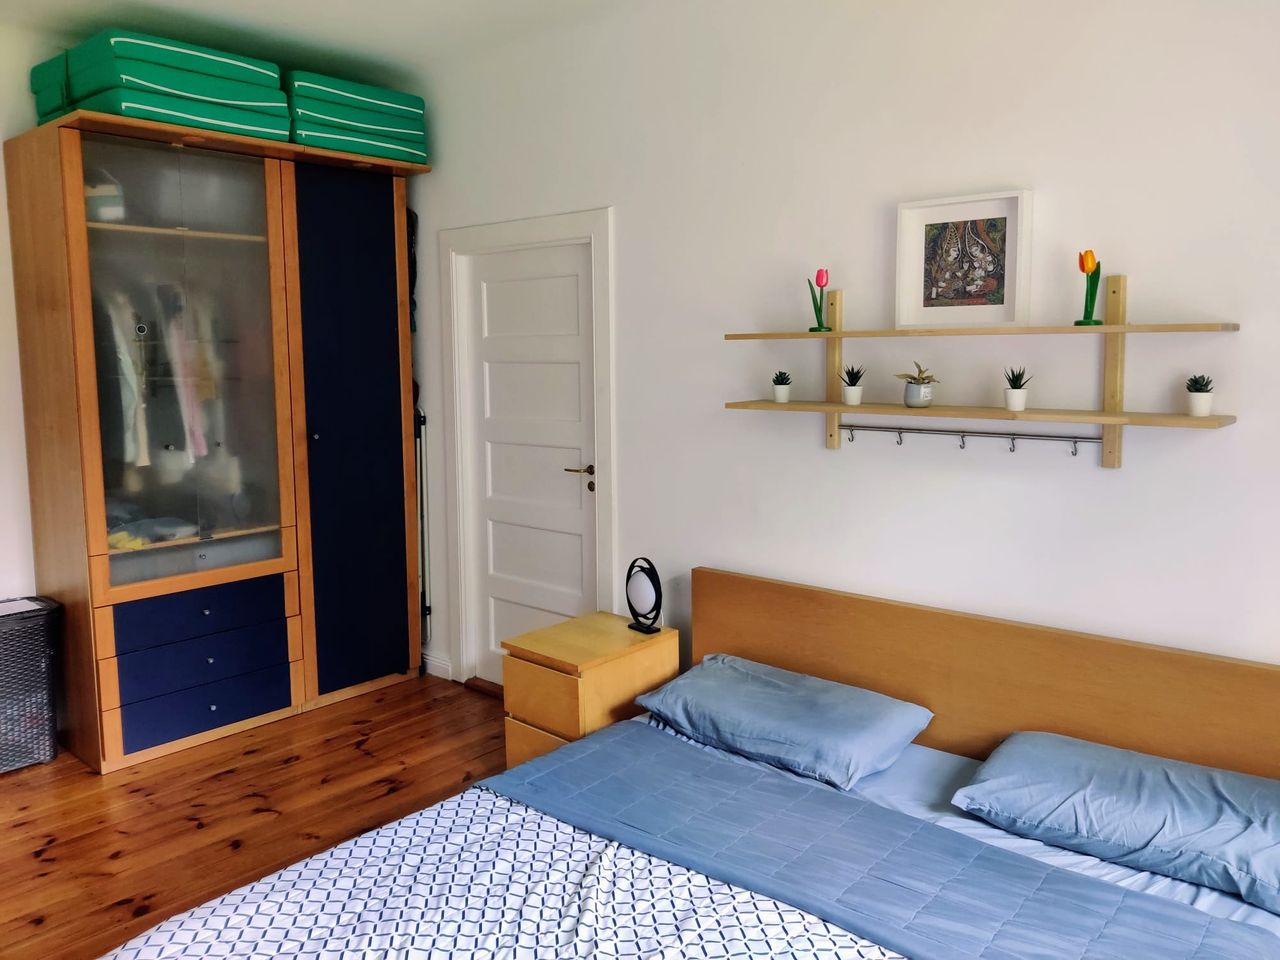 Beautiful, bright 3-room apartment in Zehlendorf, near Schlachtensee (10min walk to the lake)